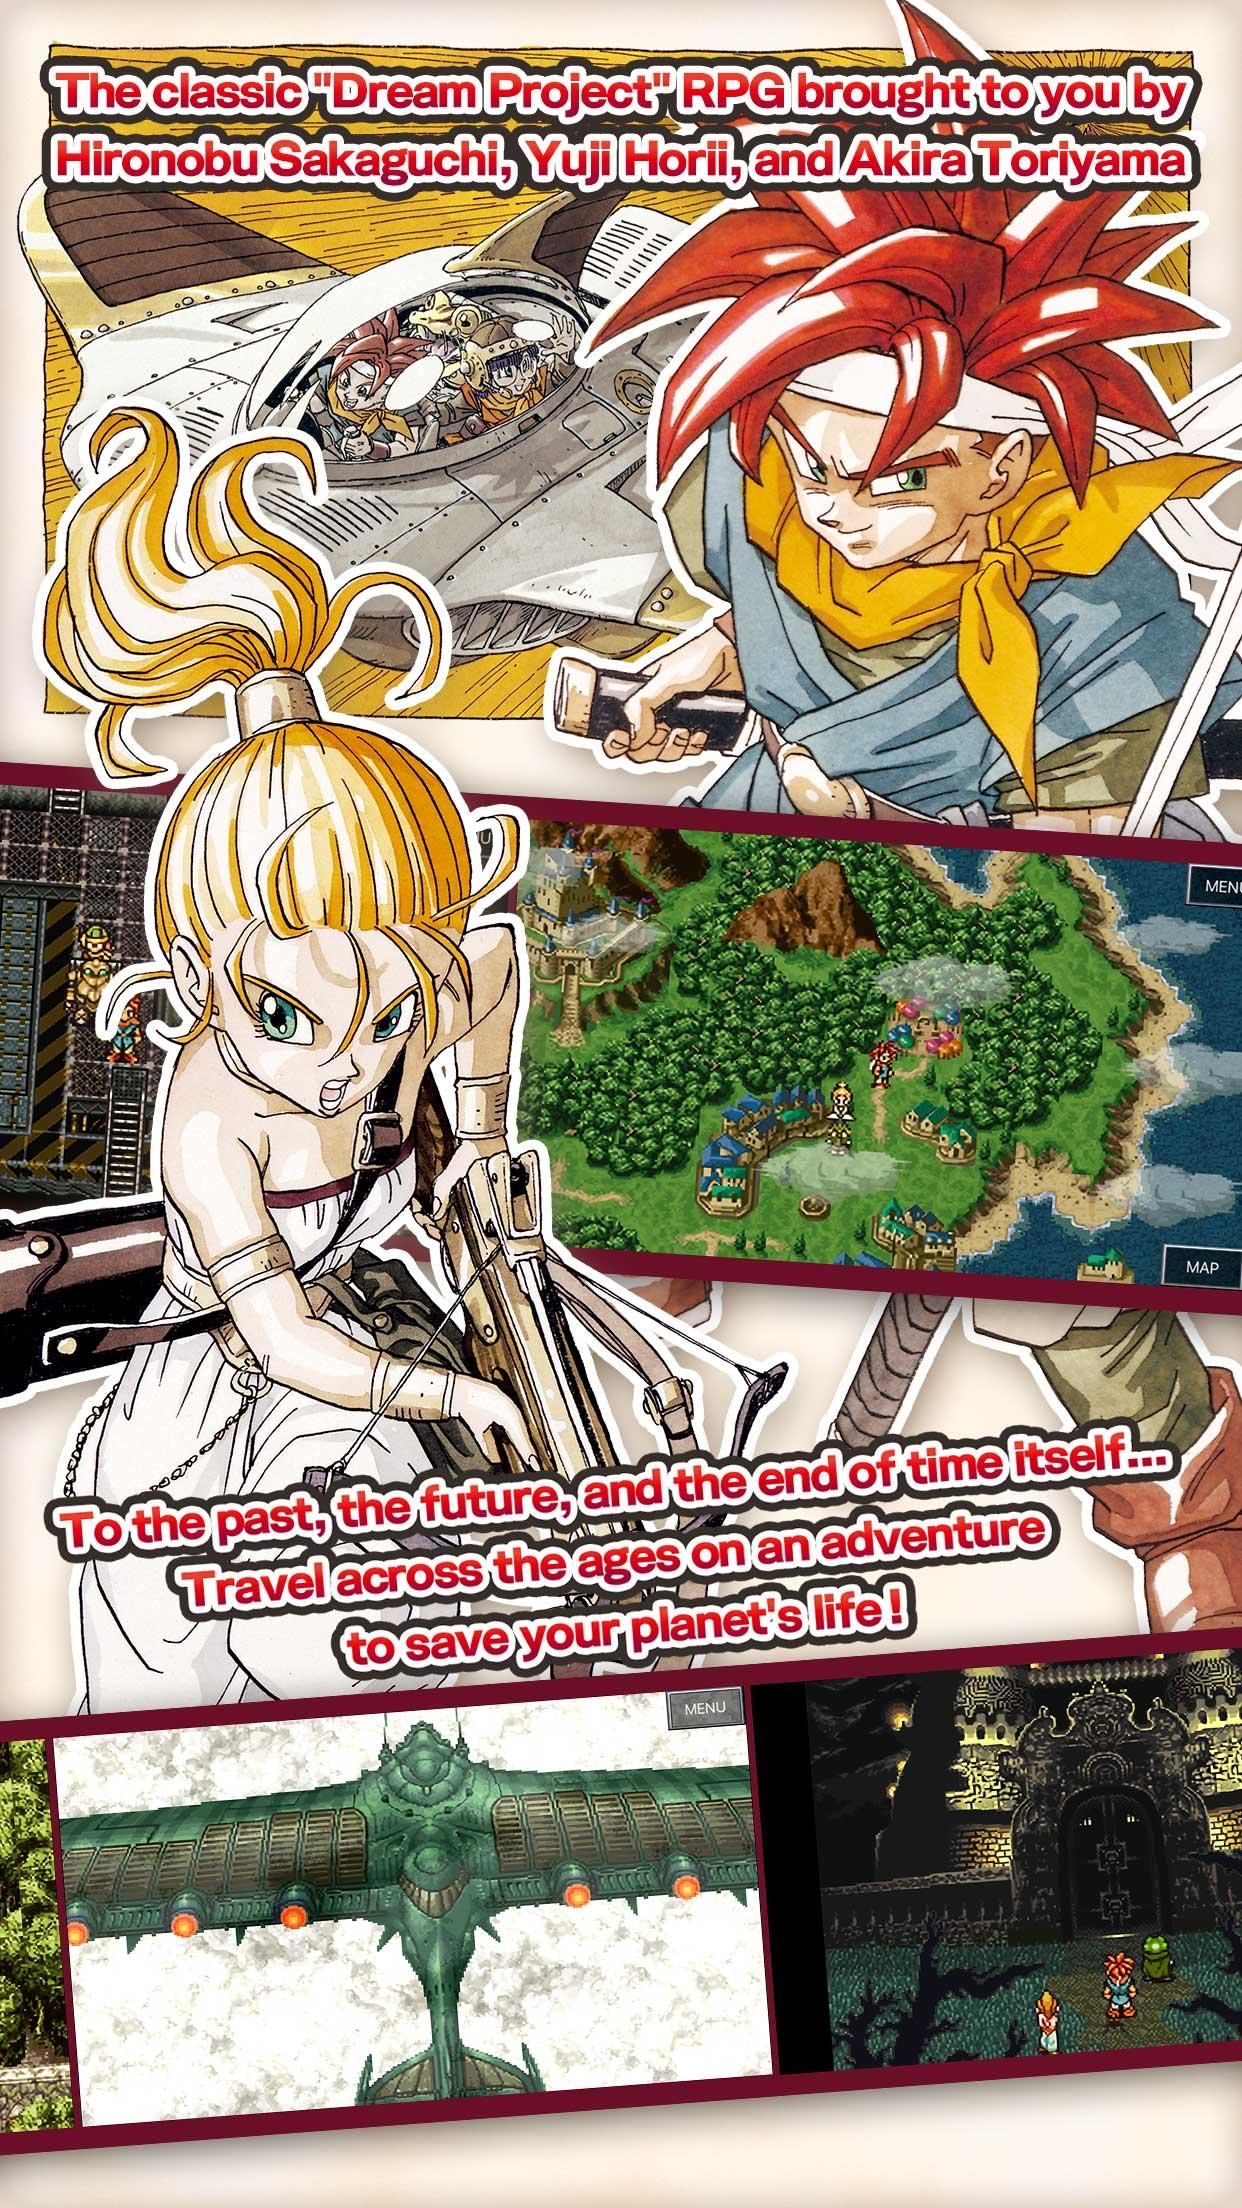 best-pixel-art-games-on-android-chrono-trigger-dream-project-rpg